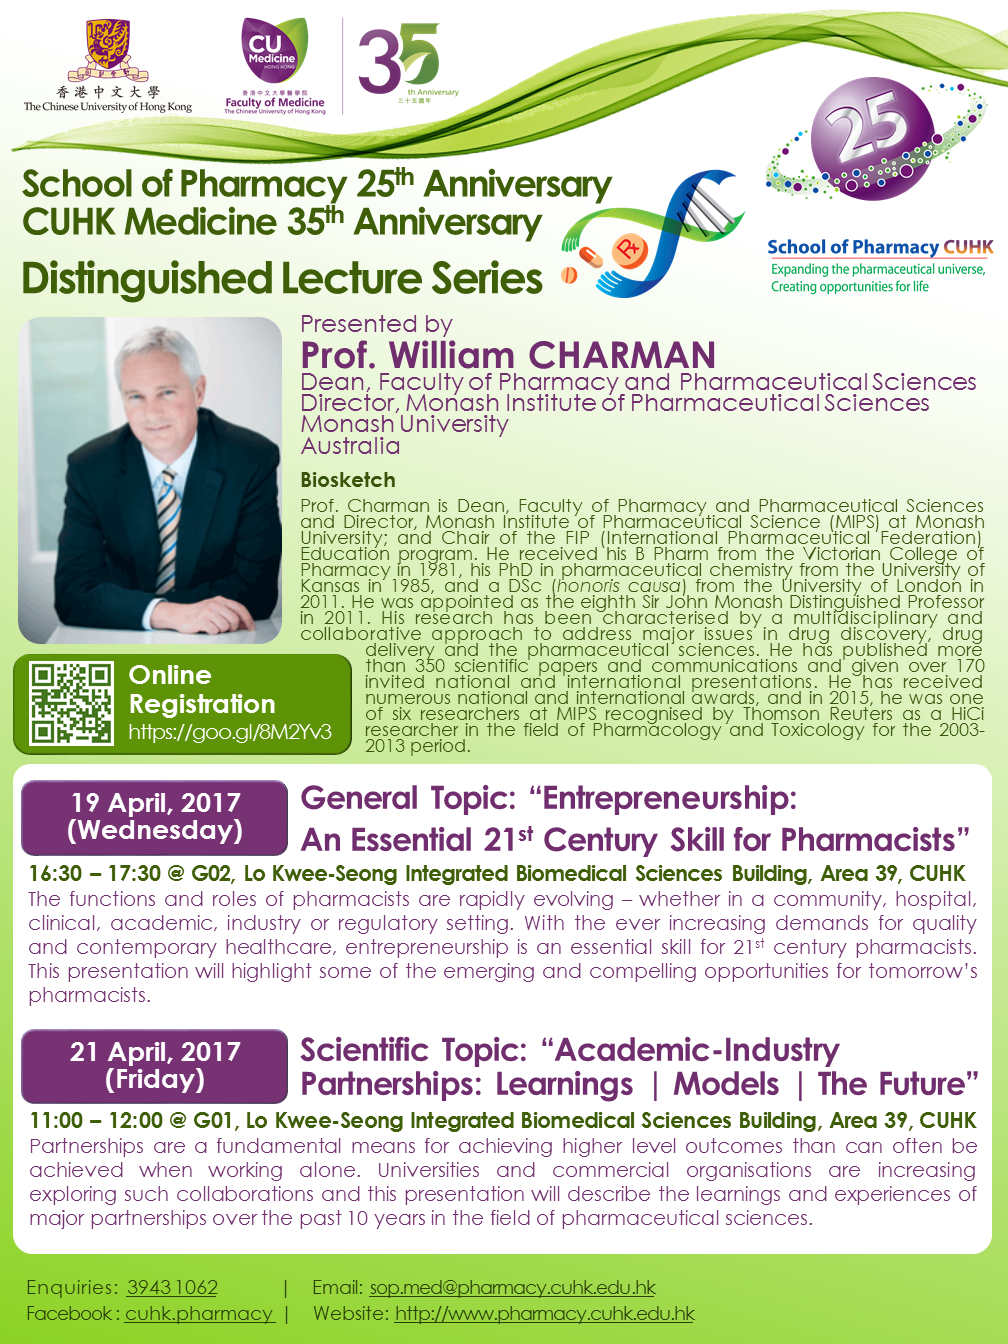 Distinguished Lecture Series 2017 @ CUHK